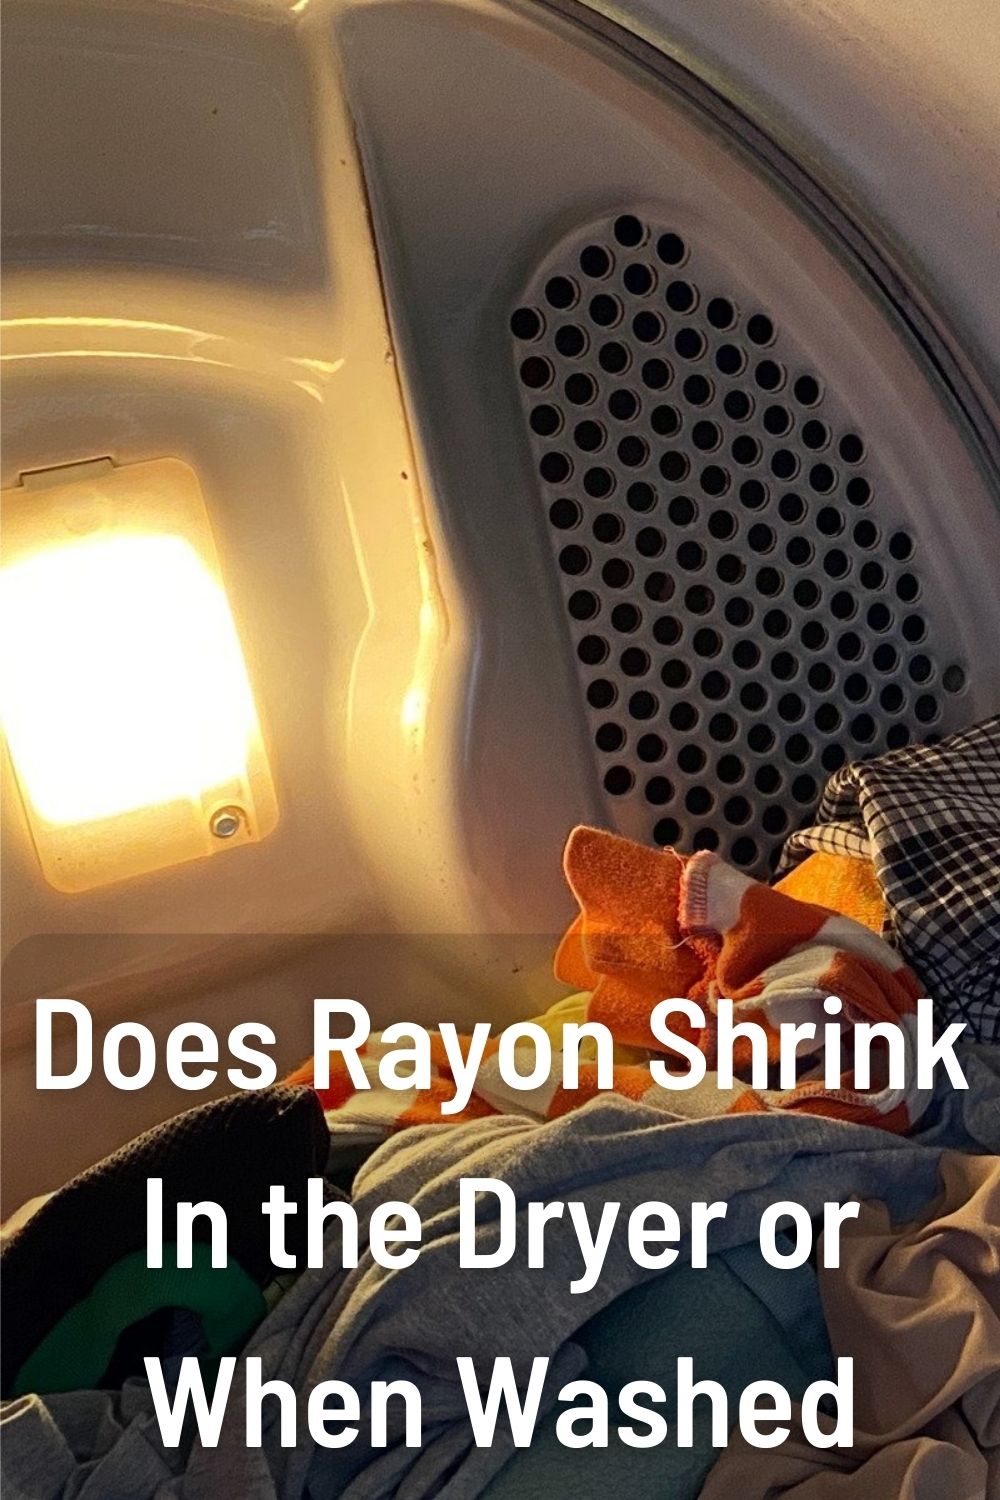 Does Rayon Shrink In the Dryer or When Washed